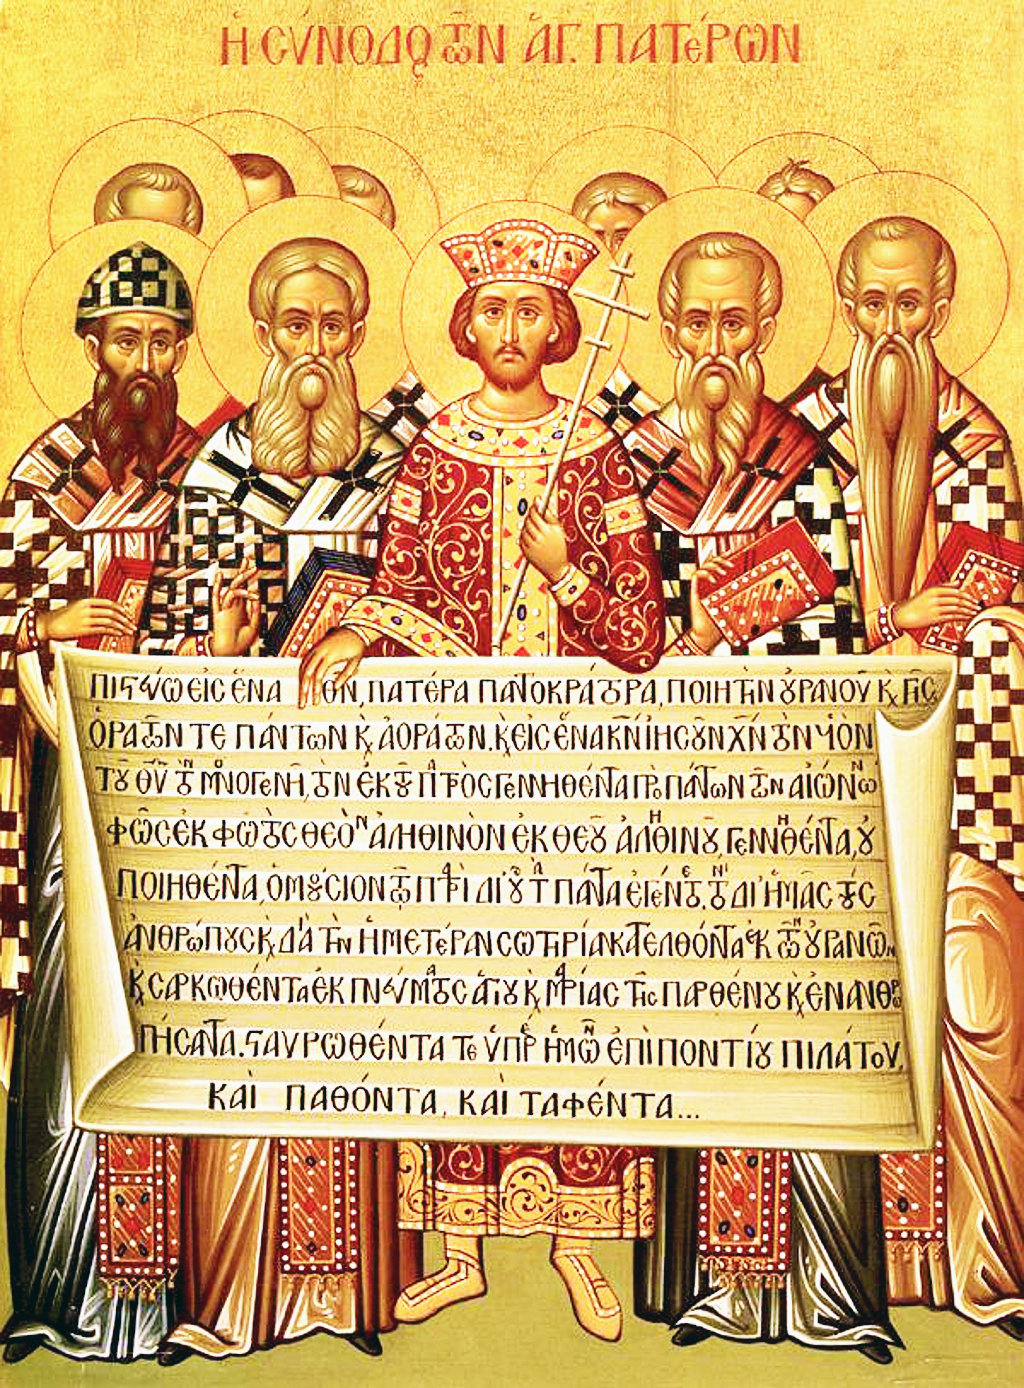 Symbolum Nicaeno-Constantinopolitanum. Icon depicting the First Council of Nicaea with ten men and a text of the Nicean Creed in Greek. The text in greek translates as:[title] The synod of the holy fathers,I believe in one god, the father the almighty, maker of heaven and earth, of all that is, seen and unseen. And in one lord, Jesus Christ, the son, the only son of god, begotten of the father for all ages. light from light, true god from true god, begotten, not made, of one being [omo-ousios] with the father, through him all things were made. For us the human beings and for our salvation he came down from the heavens and he became incarnate out of the holy spirit and the virgin mary and man was made. He was crucified for our sake under pontius pilate. And he suffered death, and was buried...